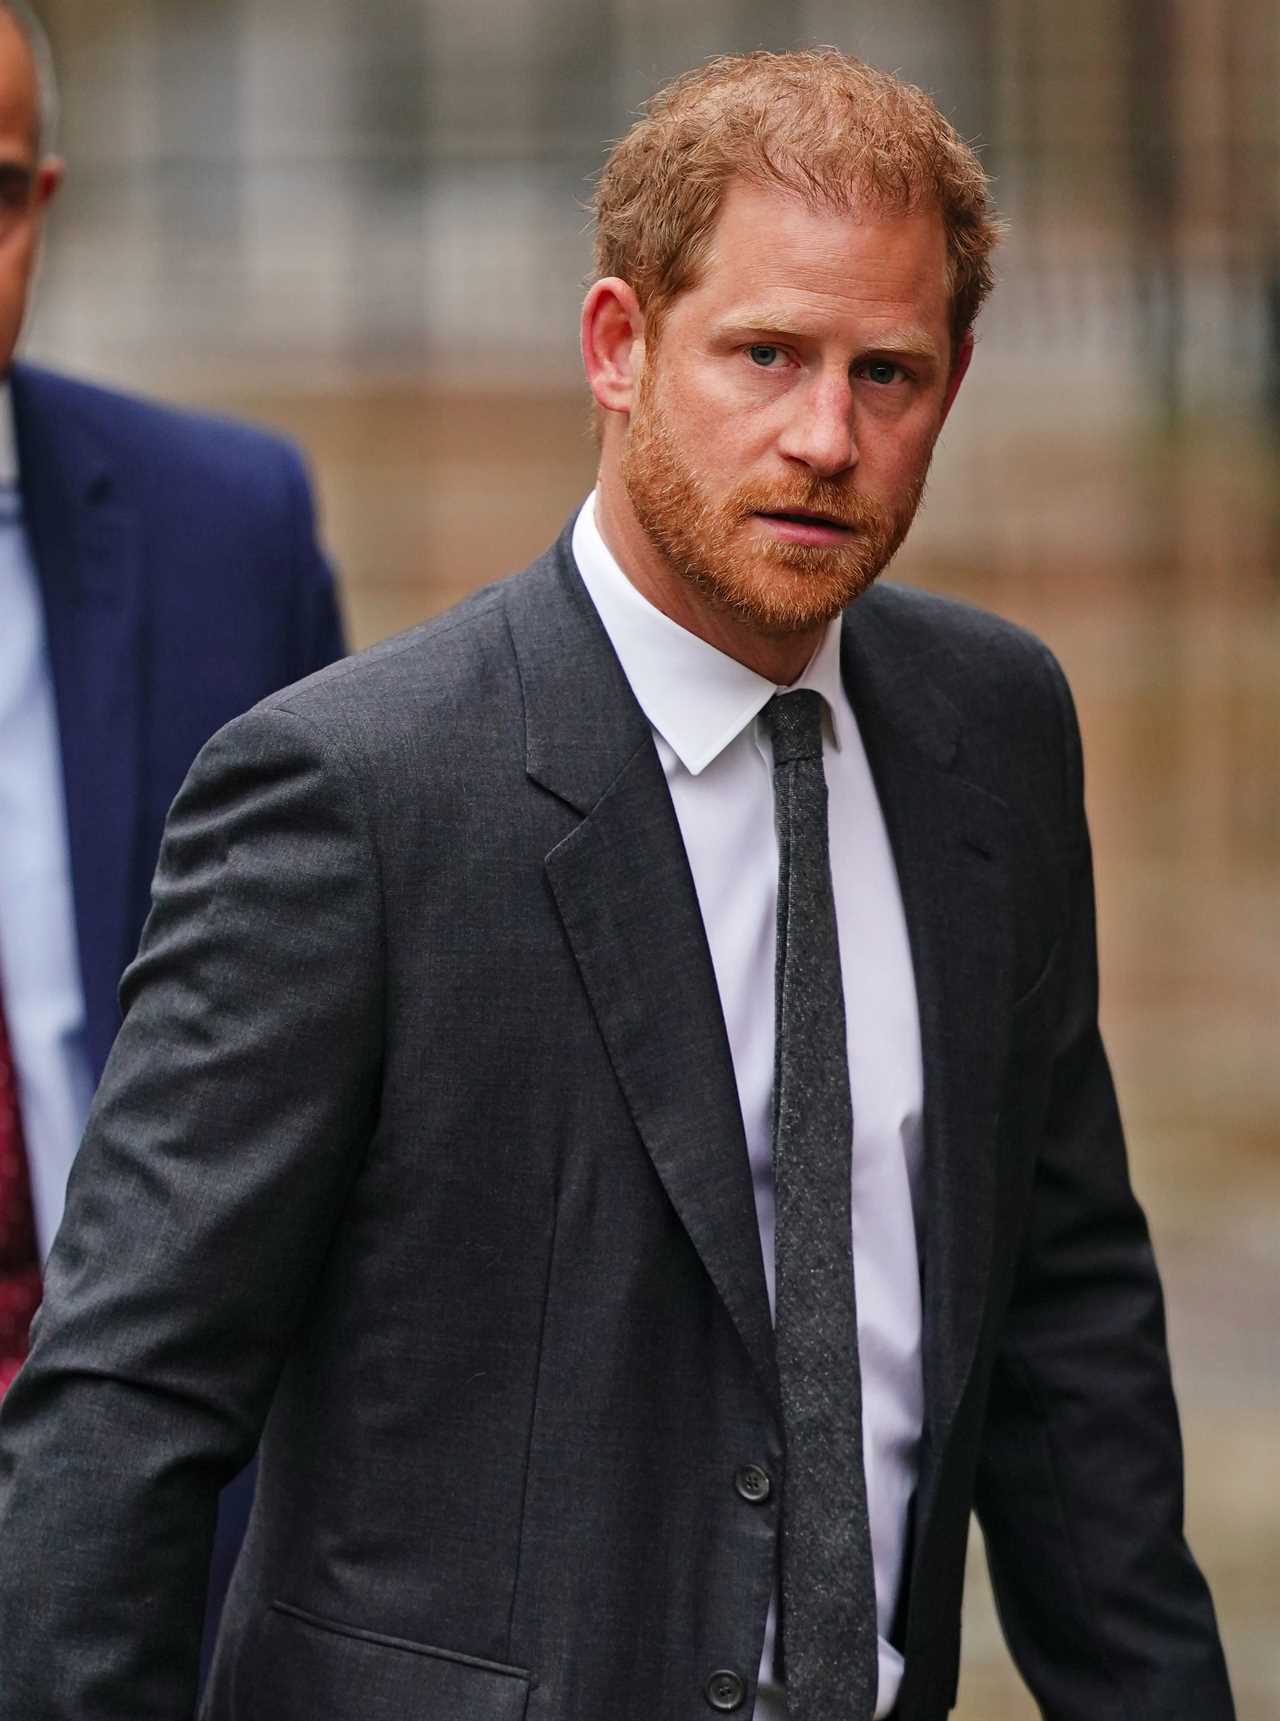 Prince Harry’s failed bid to pay for own armed police cost taxpayers over £300,000